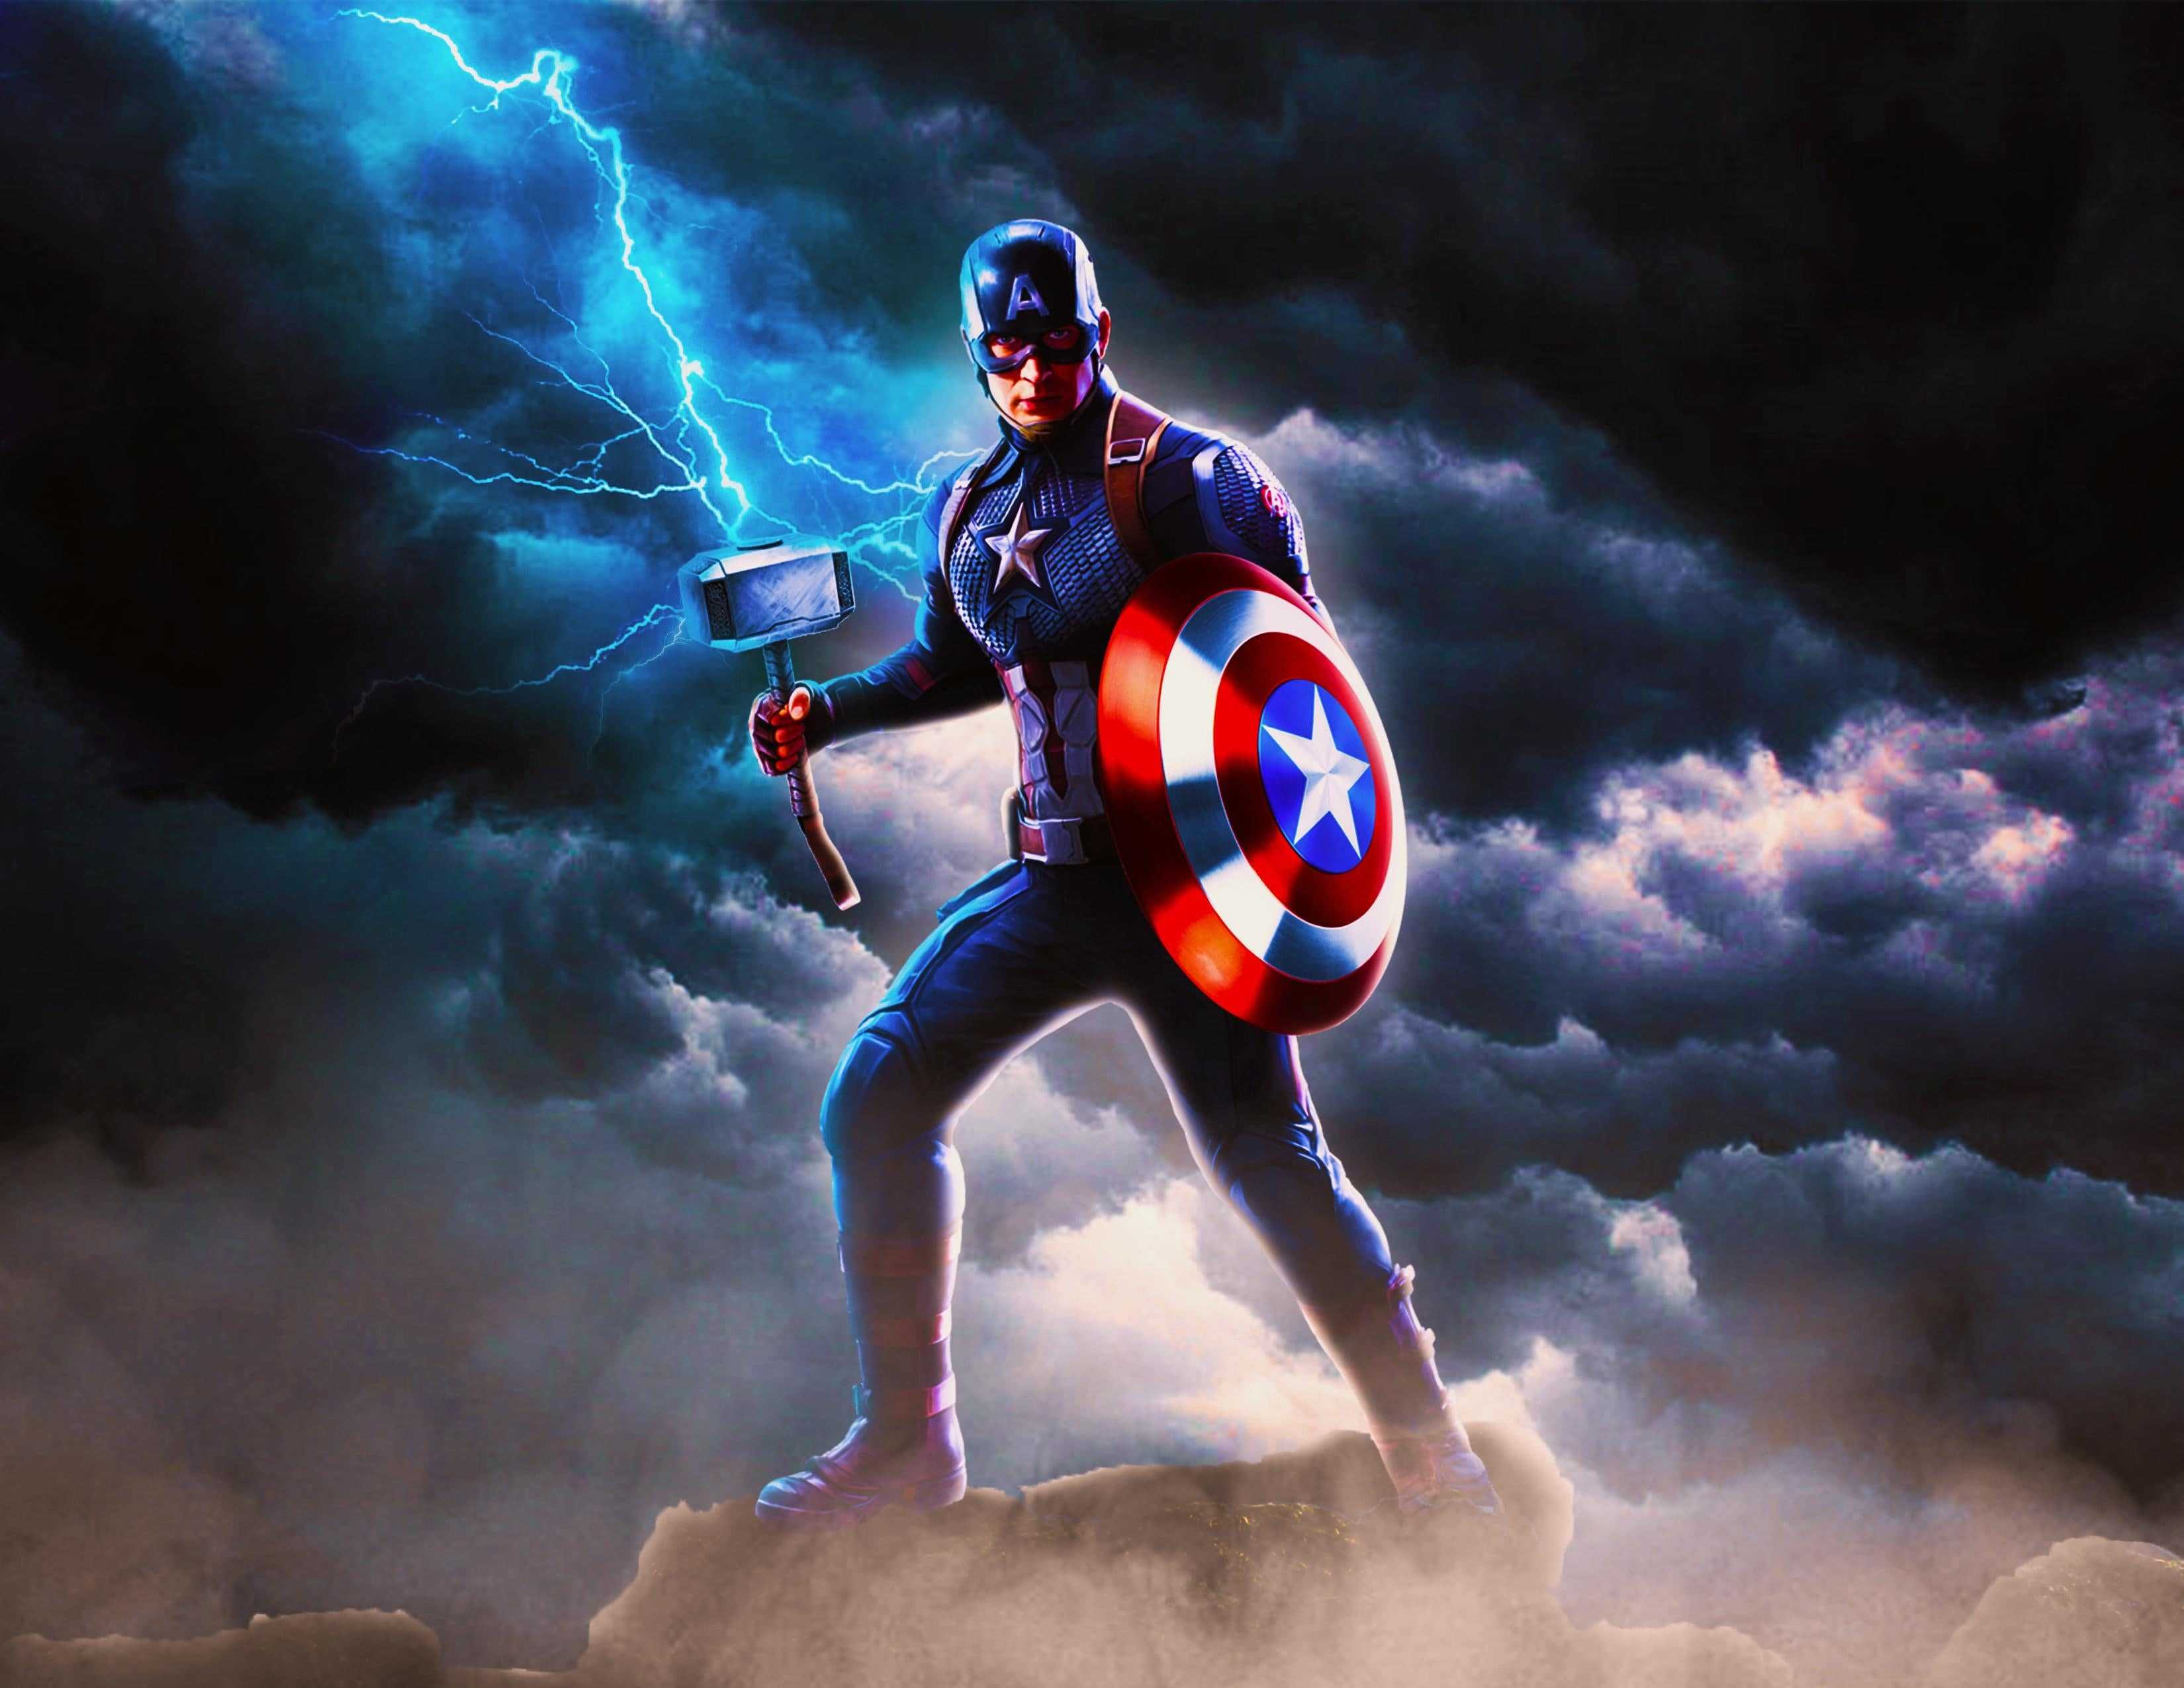 Captain America In Avengers Age Of Ultron  Captain America Wallpaper Hd  Android  1080x1920 Wallpaper  teahubio